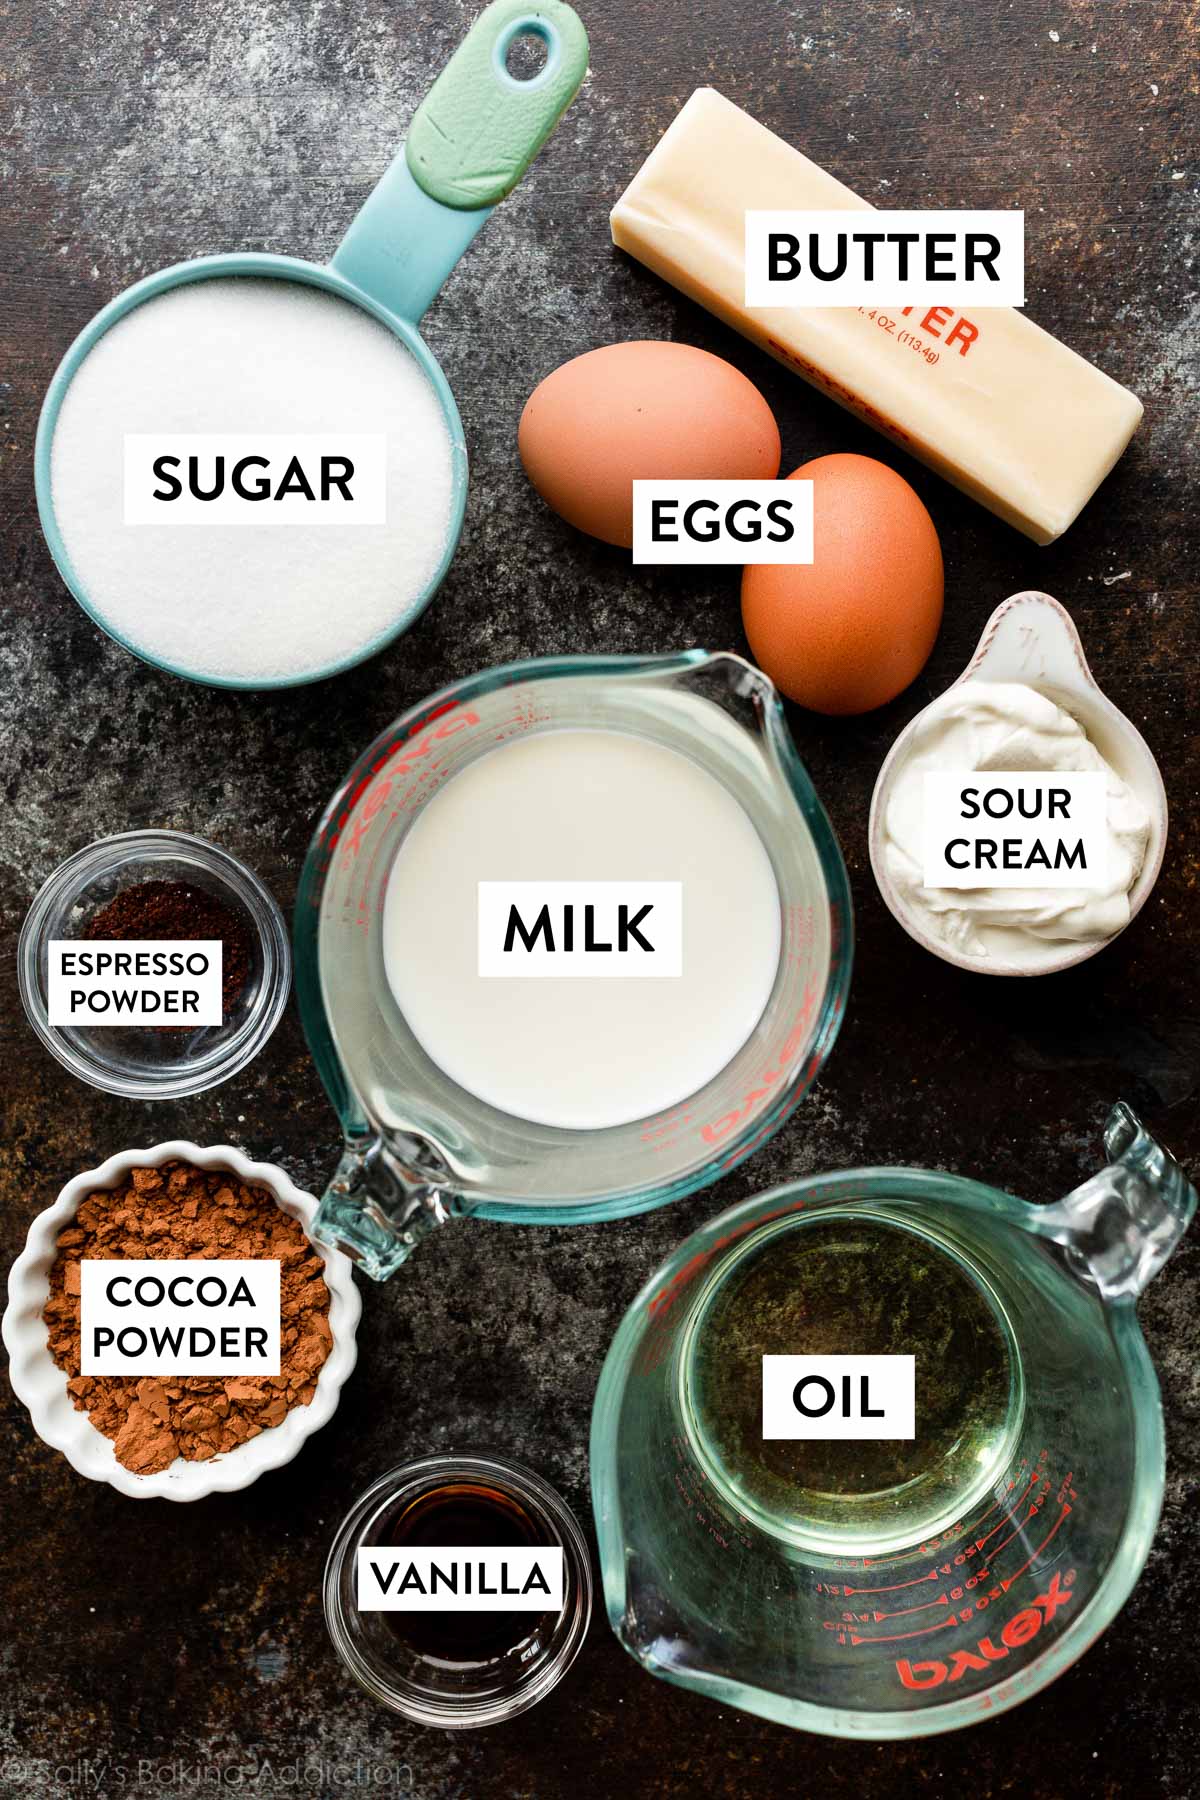 ingredients on black countertop including sugar, butter, eggs, milk, oil and others